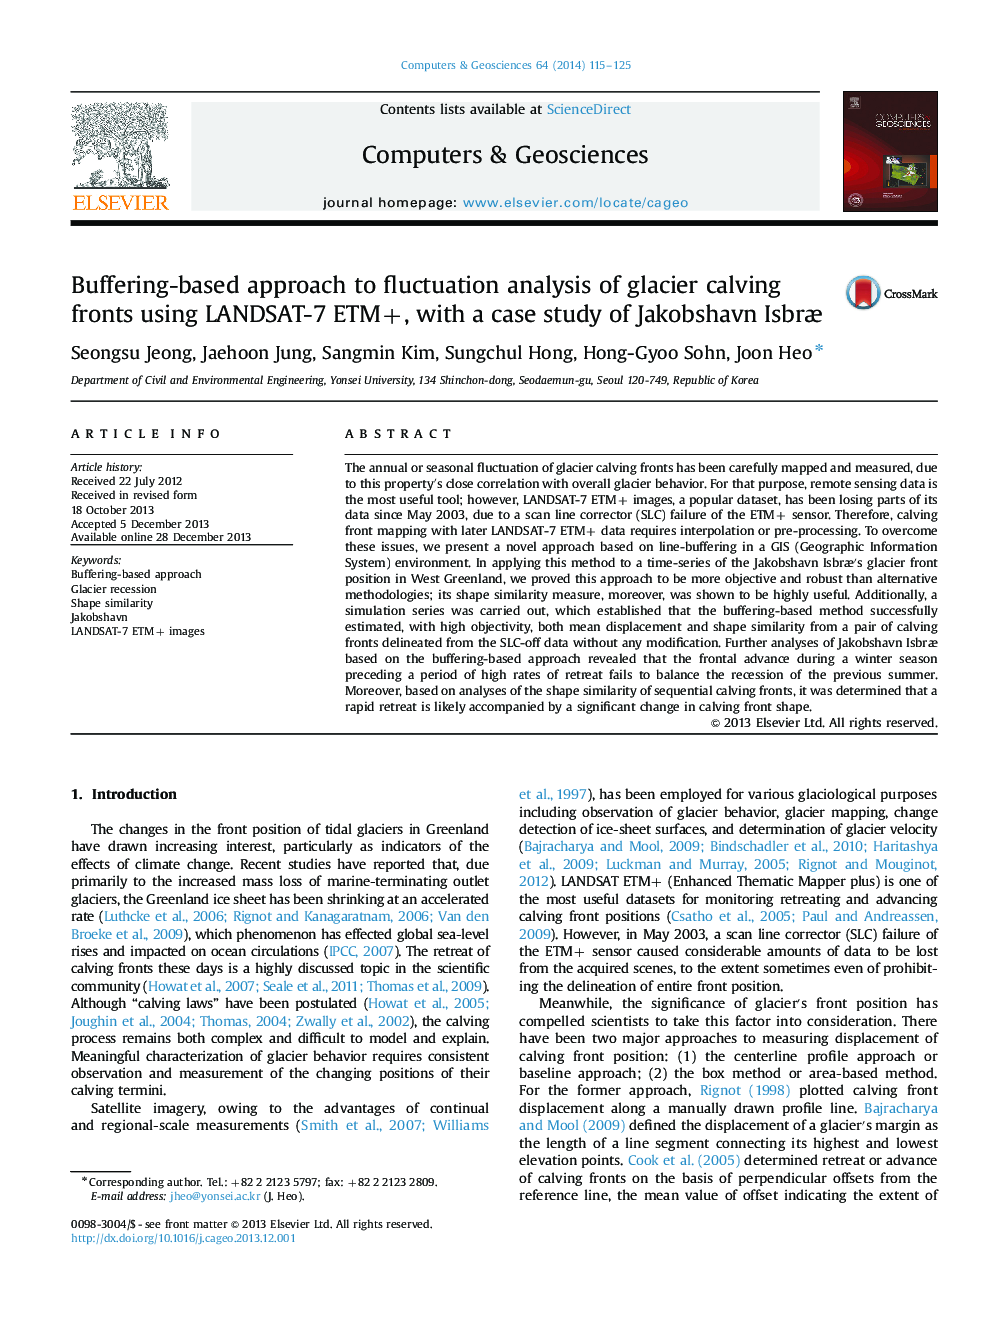 Buffering-based approach to fluctuation analysis of glacier calving fronts using LANDSAT-7 ETM+, with a case study of Jakobshavn IsbrÃ¦